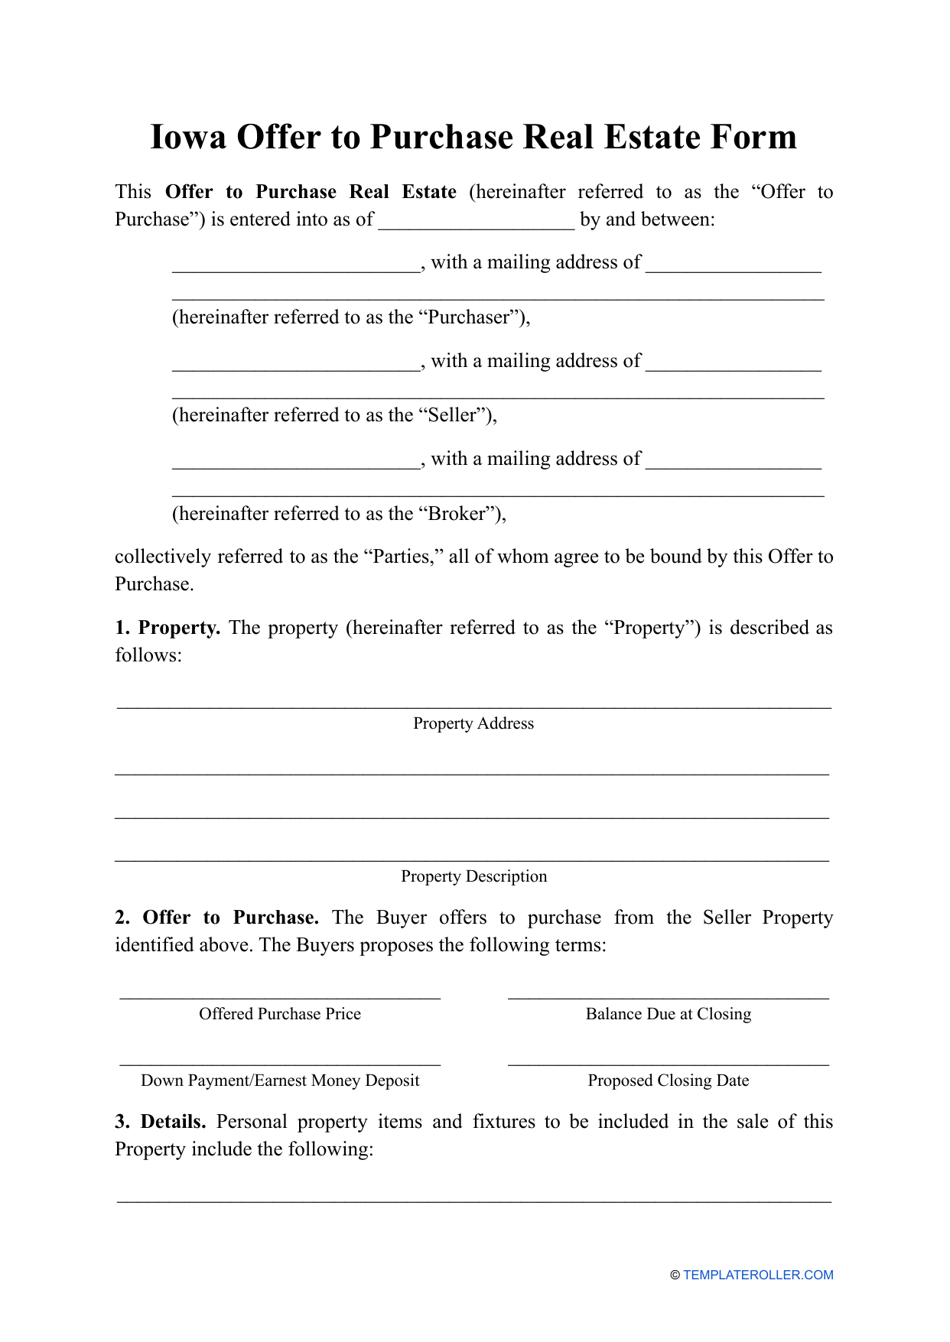 Offer to Purchase Real Estate Form - Iowa, Page 1